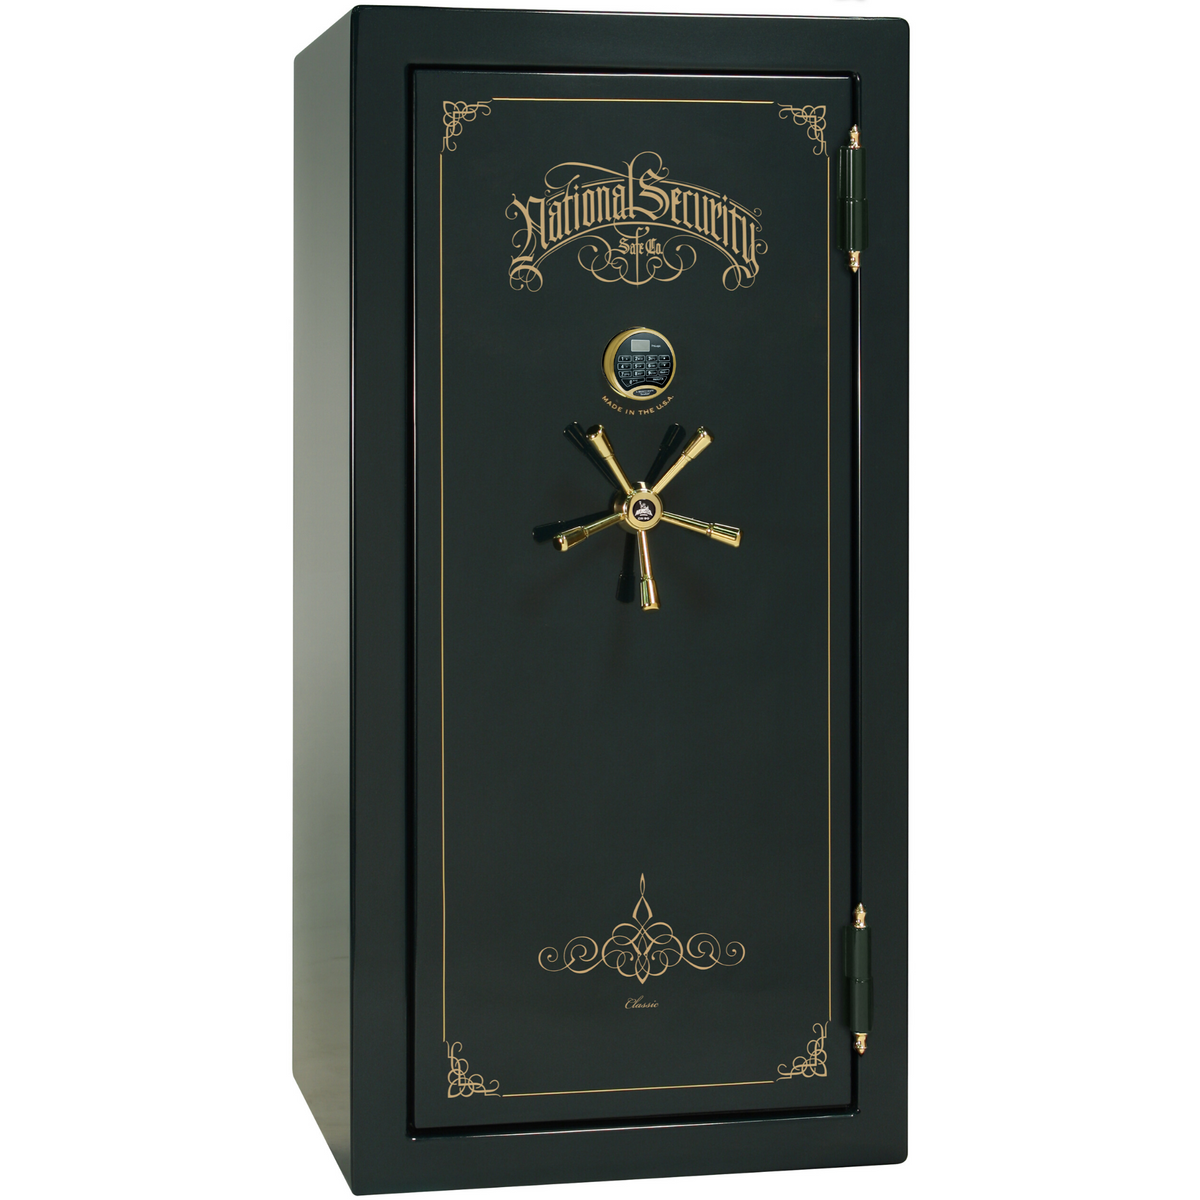 Liberty Safe Classic Plus 25 in Green Gloss with Brass Electronic Lock, closed door.